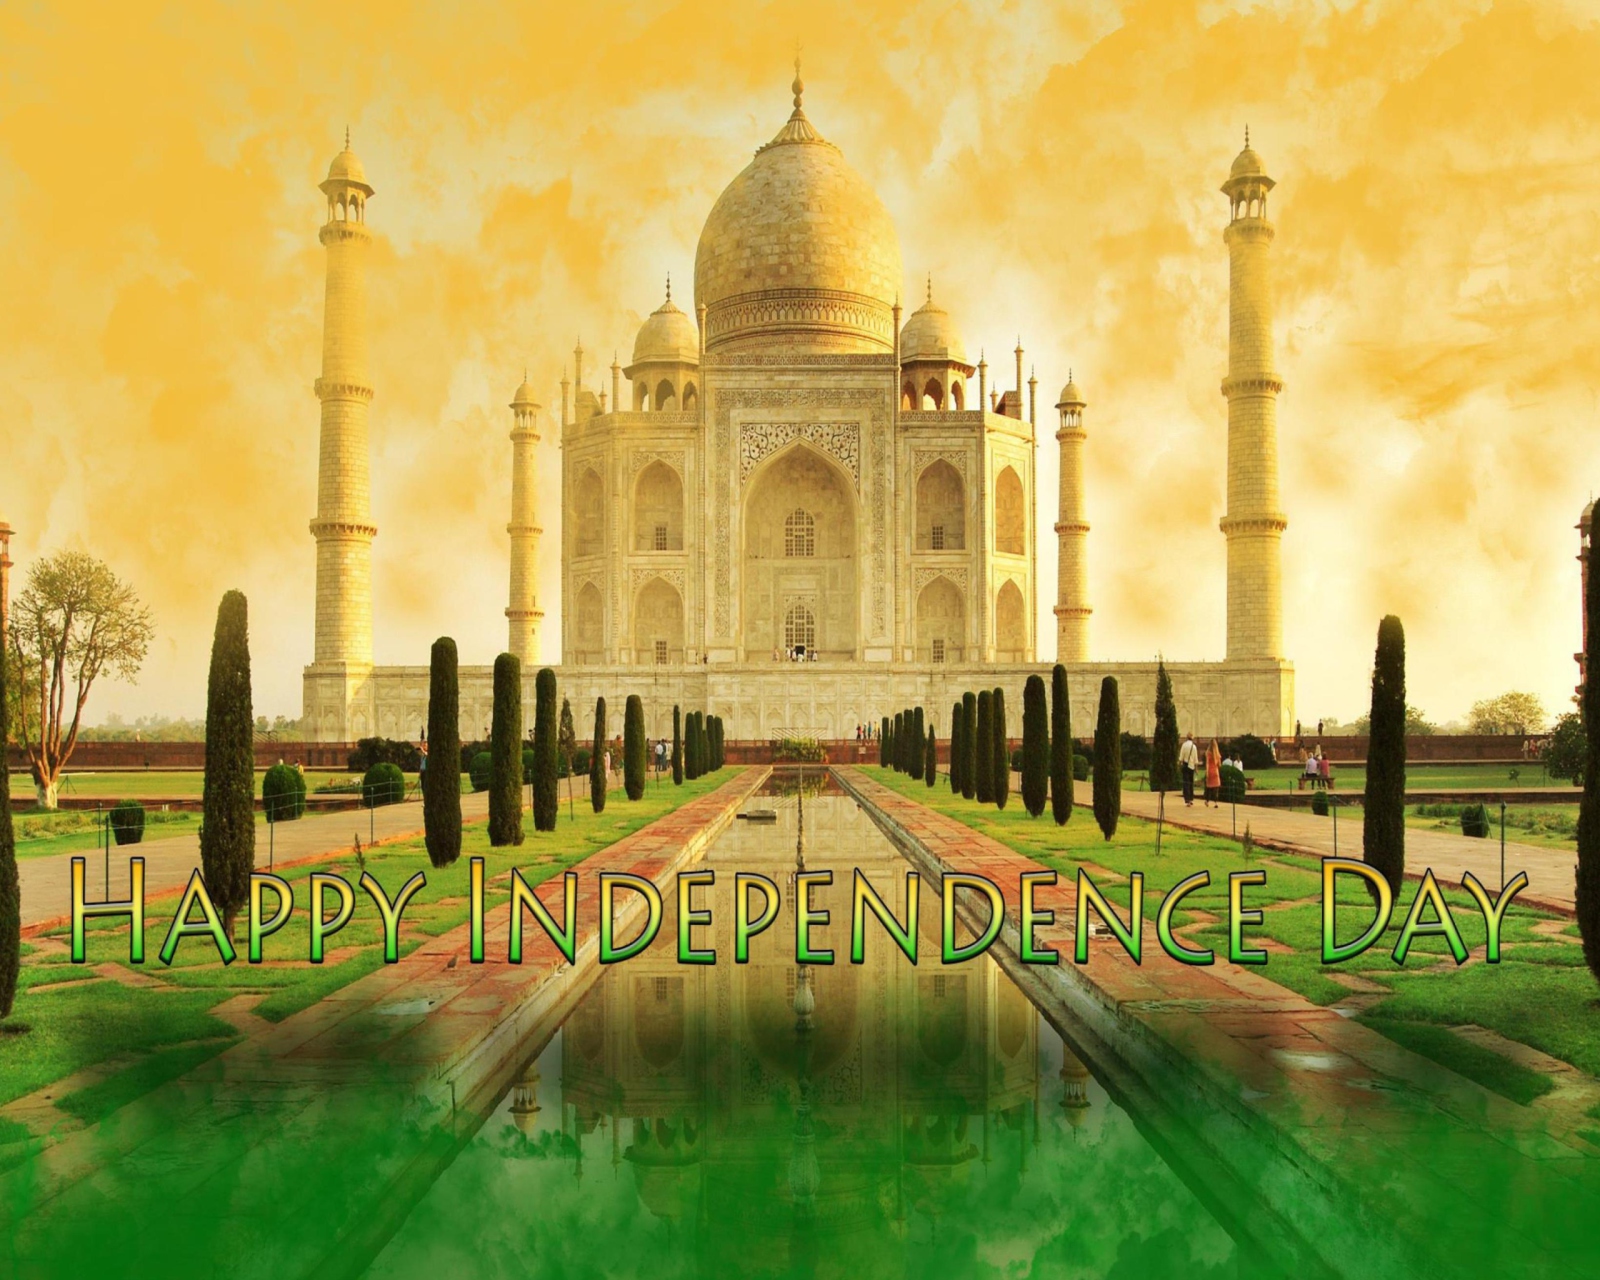 Happy Independence Day in India screenshot #1 1600x1280